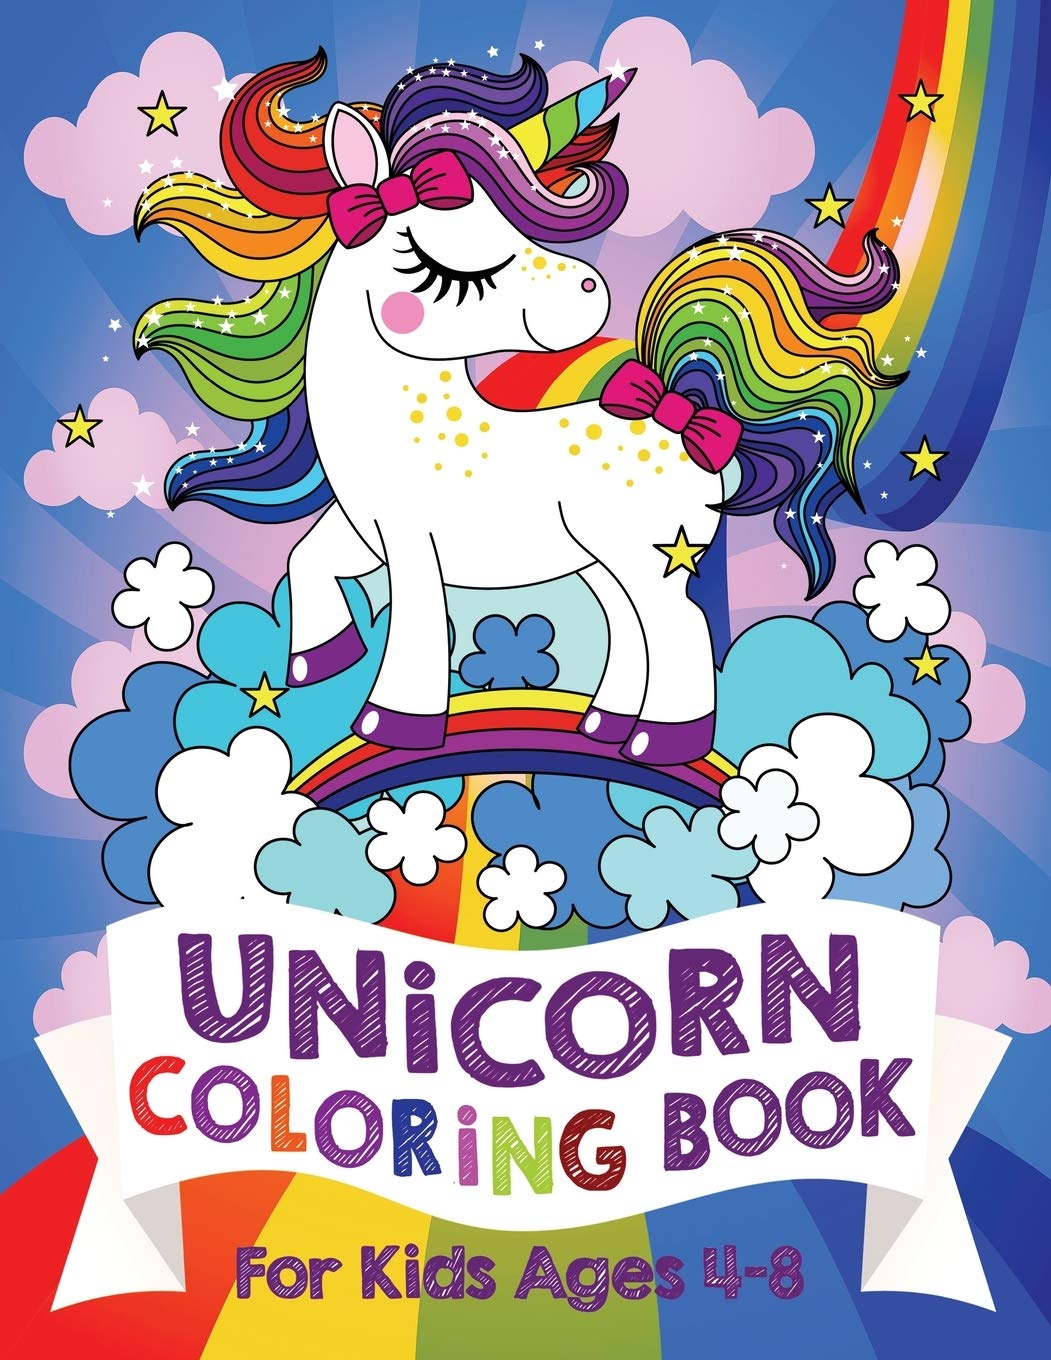 Unicorn Coloring Book For Kids Ages 4-8 (US Edition) by Bear, Silly